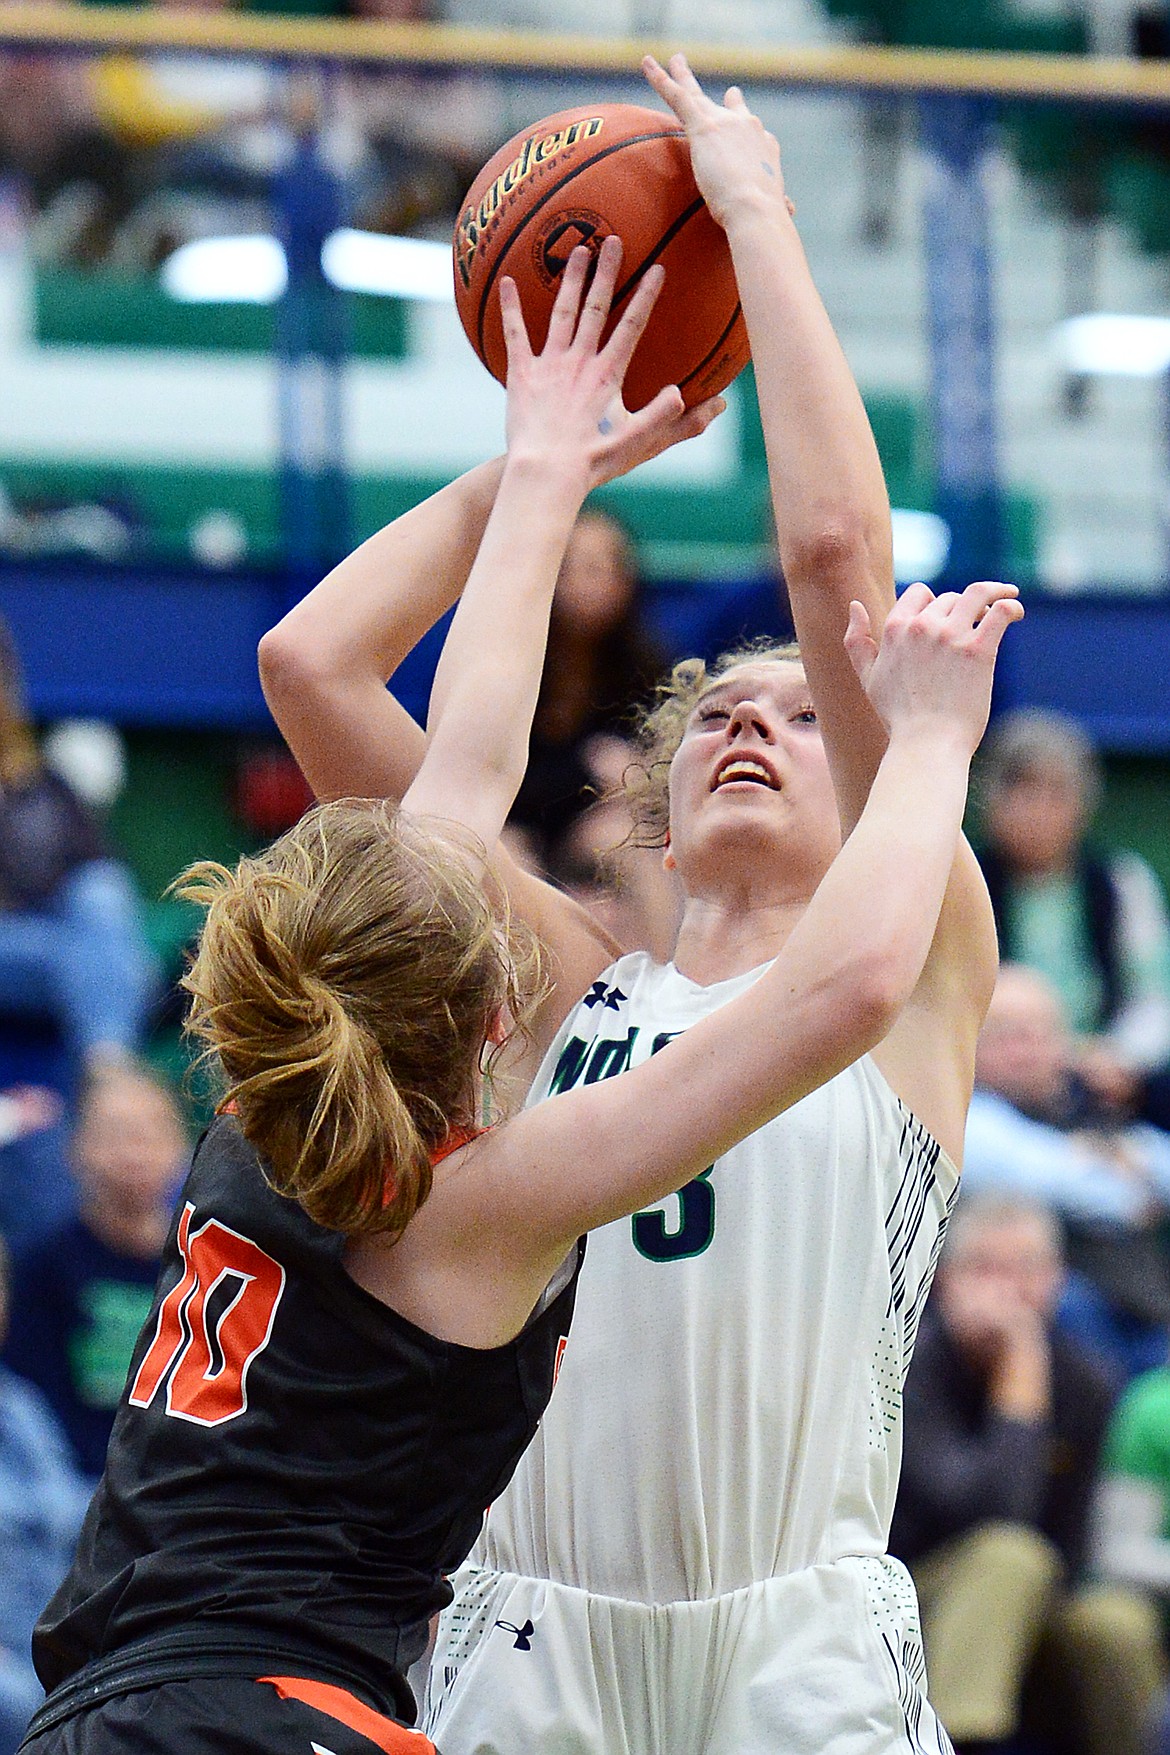 Glacier's Kali Gulick (3) looks to shoot over Flathead's Kennedy Kanter (10) during Western AA Divisional play at Glacier High School on Thursday. (Casey Kreider/Daily Inter Lake)